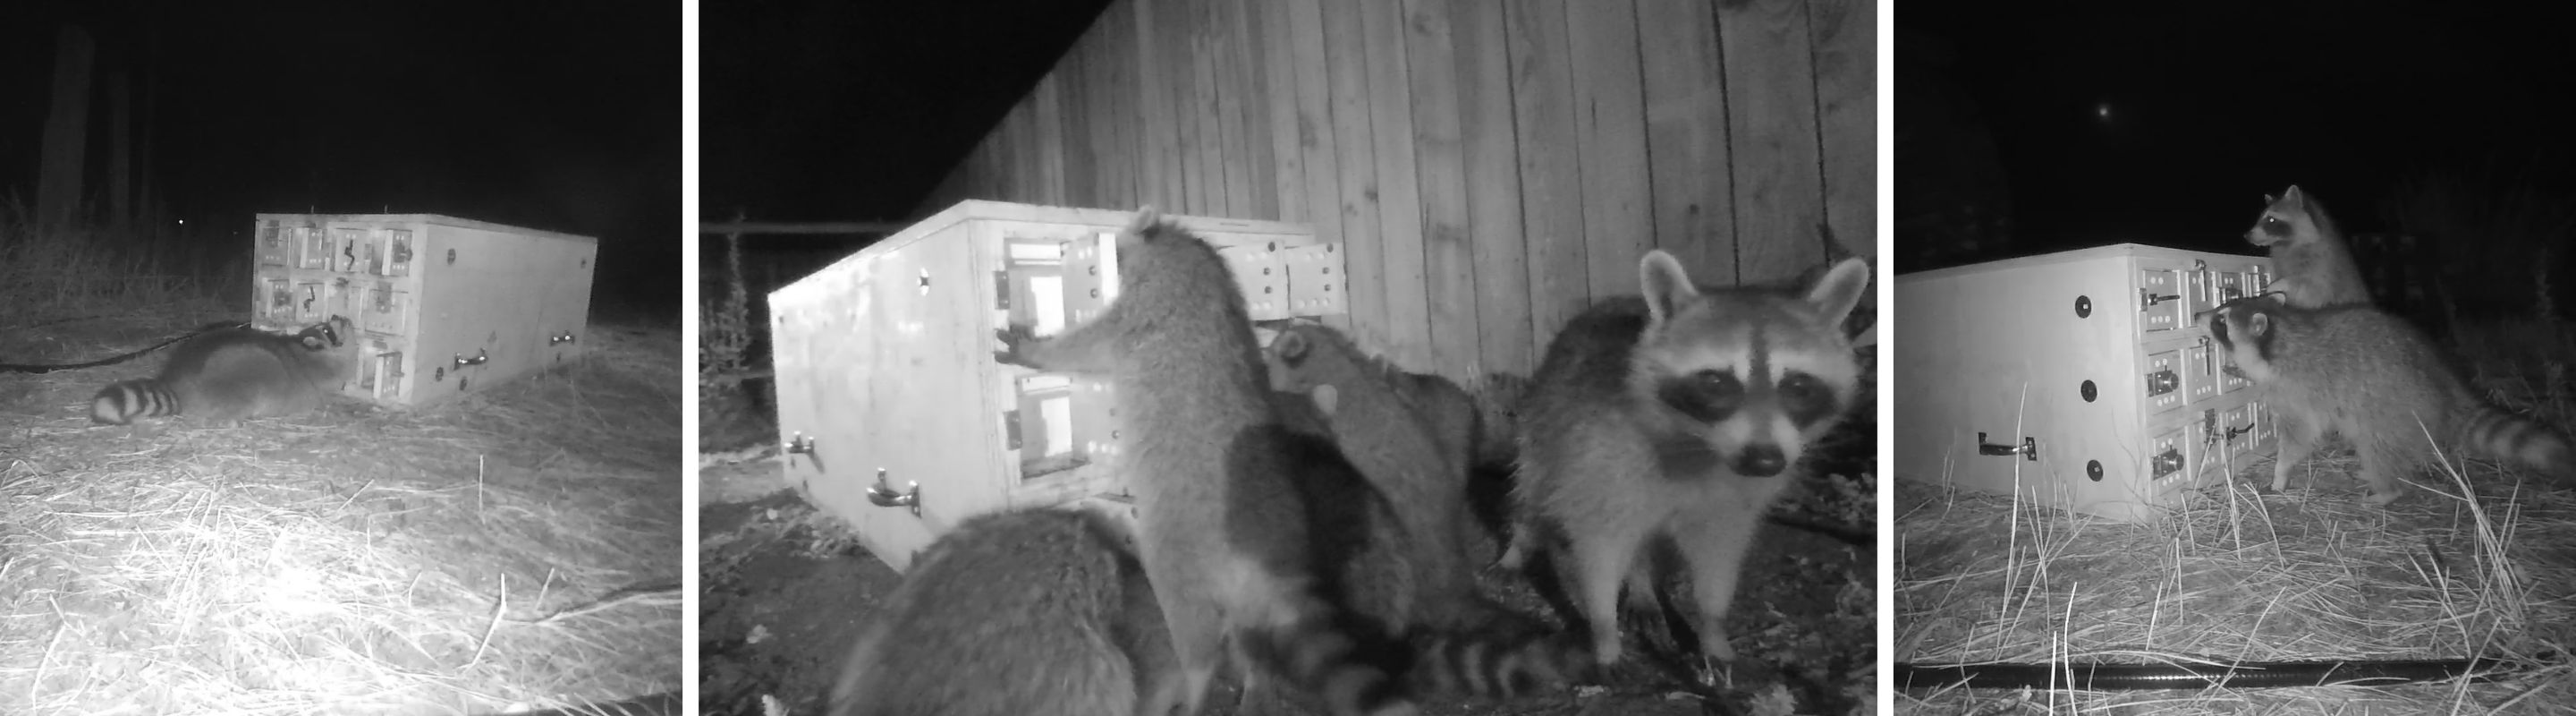 Three photos in a banner of raccoons engaging with a puzzle box at night